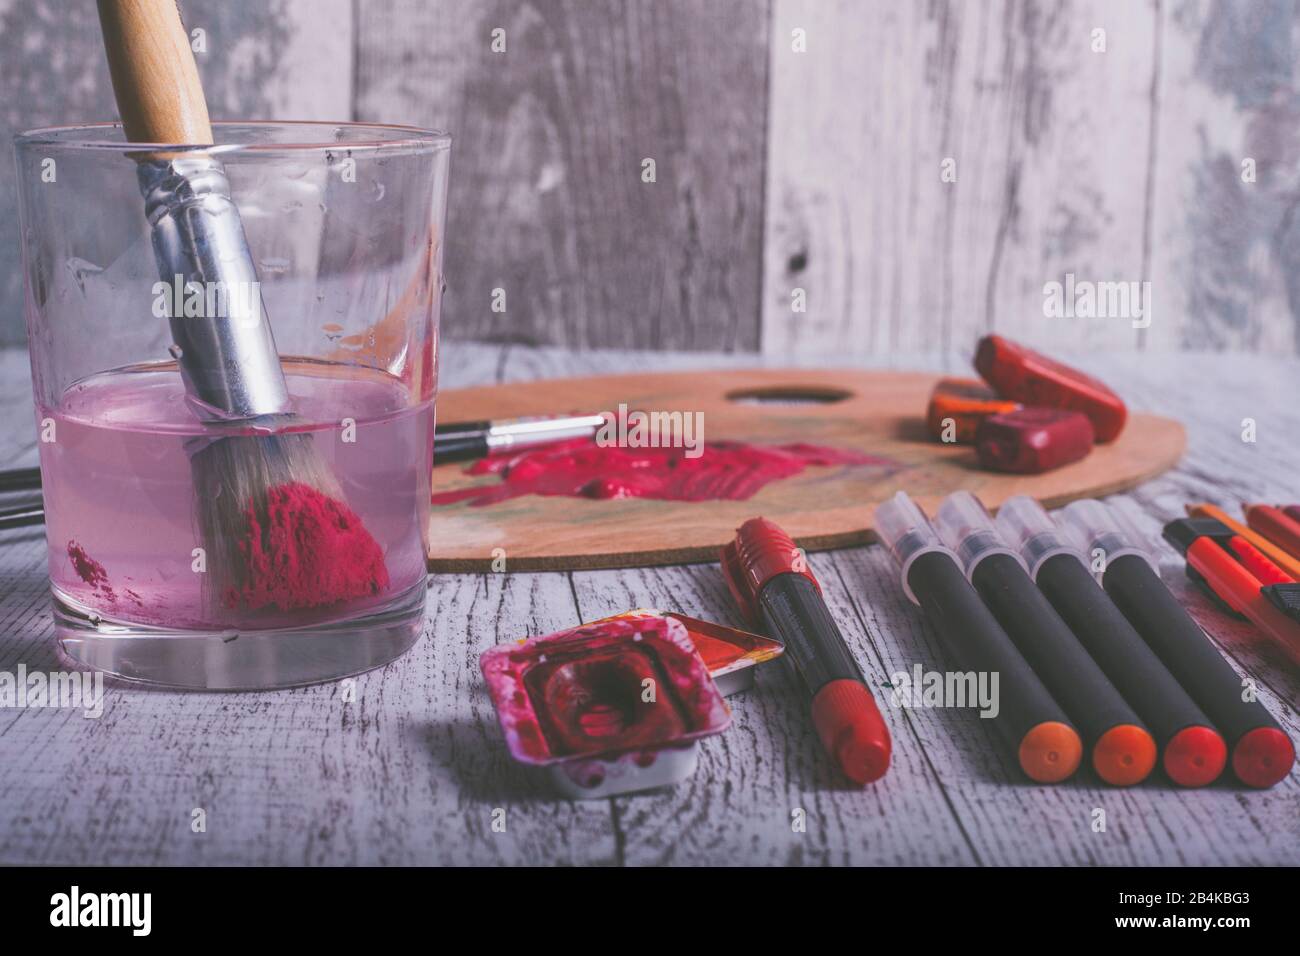 Arrangement of various pens and painting utensils in the color red Stock Photo